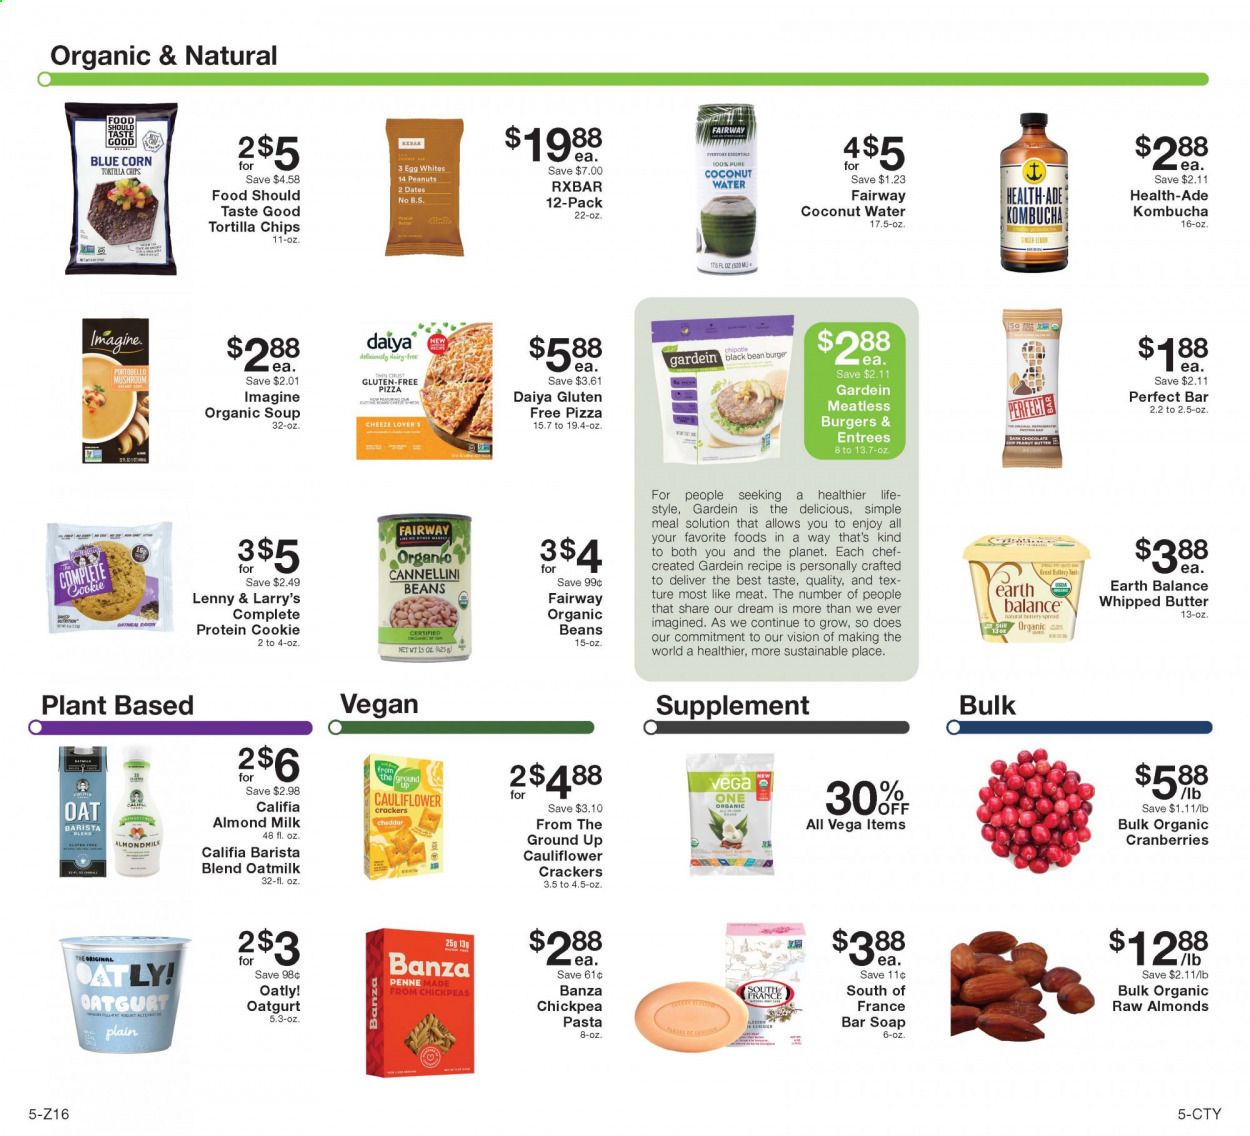 thumbnail - Fairway Market Flyer - 03/05/2021 - 03/11/2021 - Sales products - portobello mushrooms, mushrooms, ginger, pizza, soup, hamburger, cheddar, almond milk, oat milk, eggs, whipped butter, buttery spread, beans, cauliflower, crackers, dark chocolate, protein cookie, tortilla chips, chips, oats, cranberries, cannellini beans, chickpeas, pasta, penne, peanut butter, raisins, dried dates, coconut water, kombucha. Page 5.